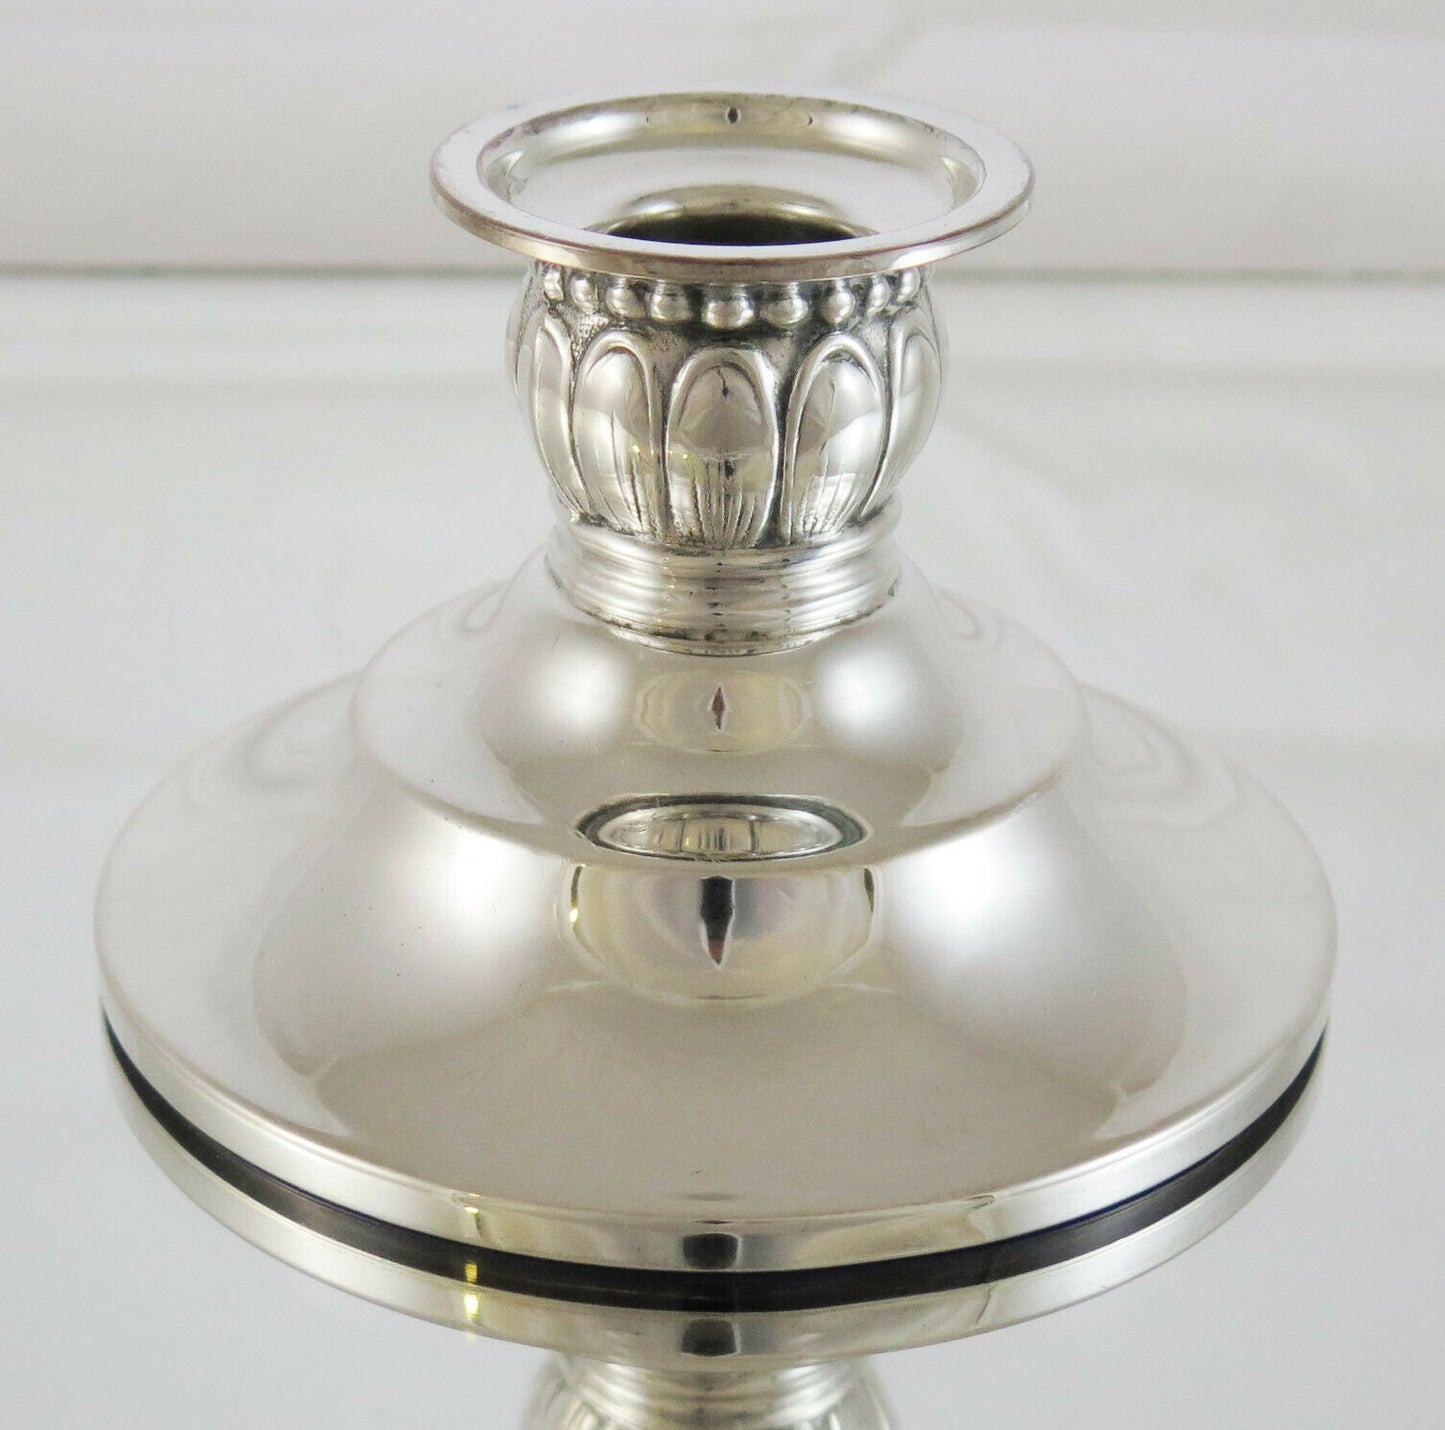 OLD CANDLESTICK LIE CANDLE HOLDER IN SILVER METAL TYPE SHEFFILED R62